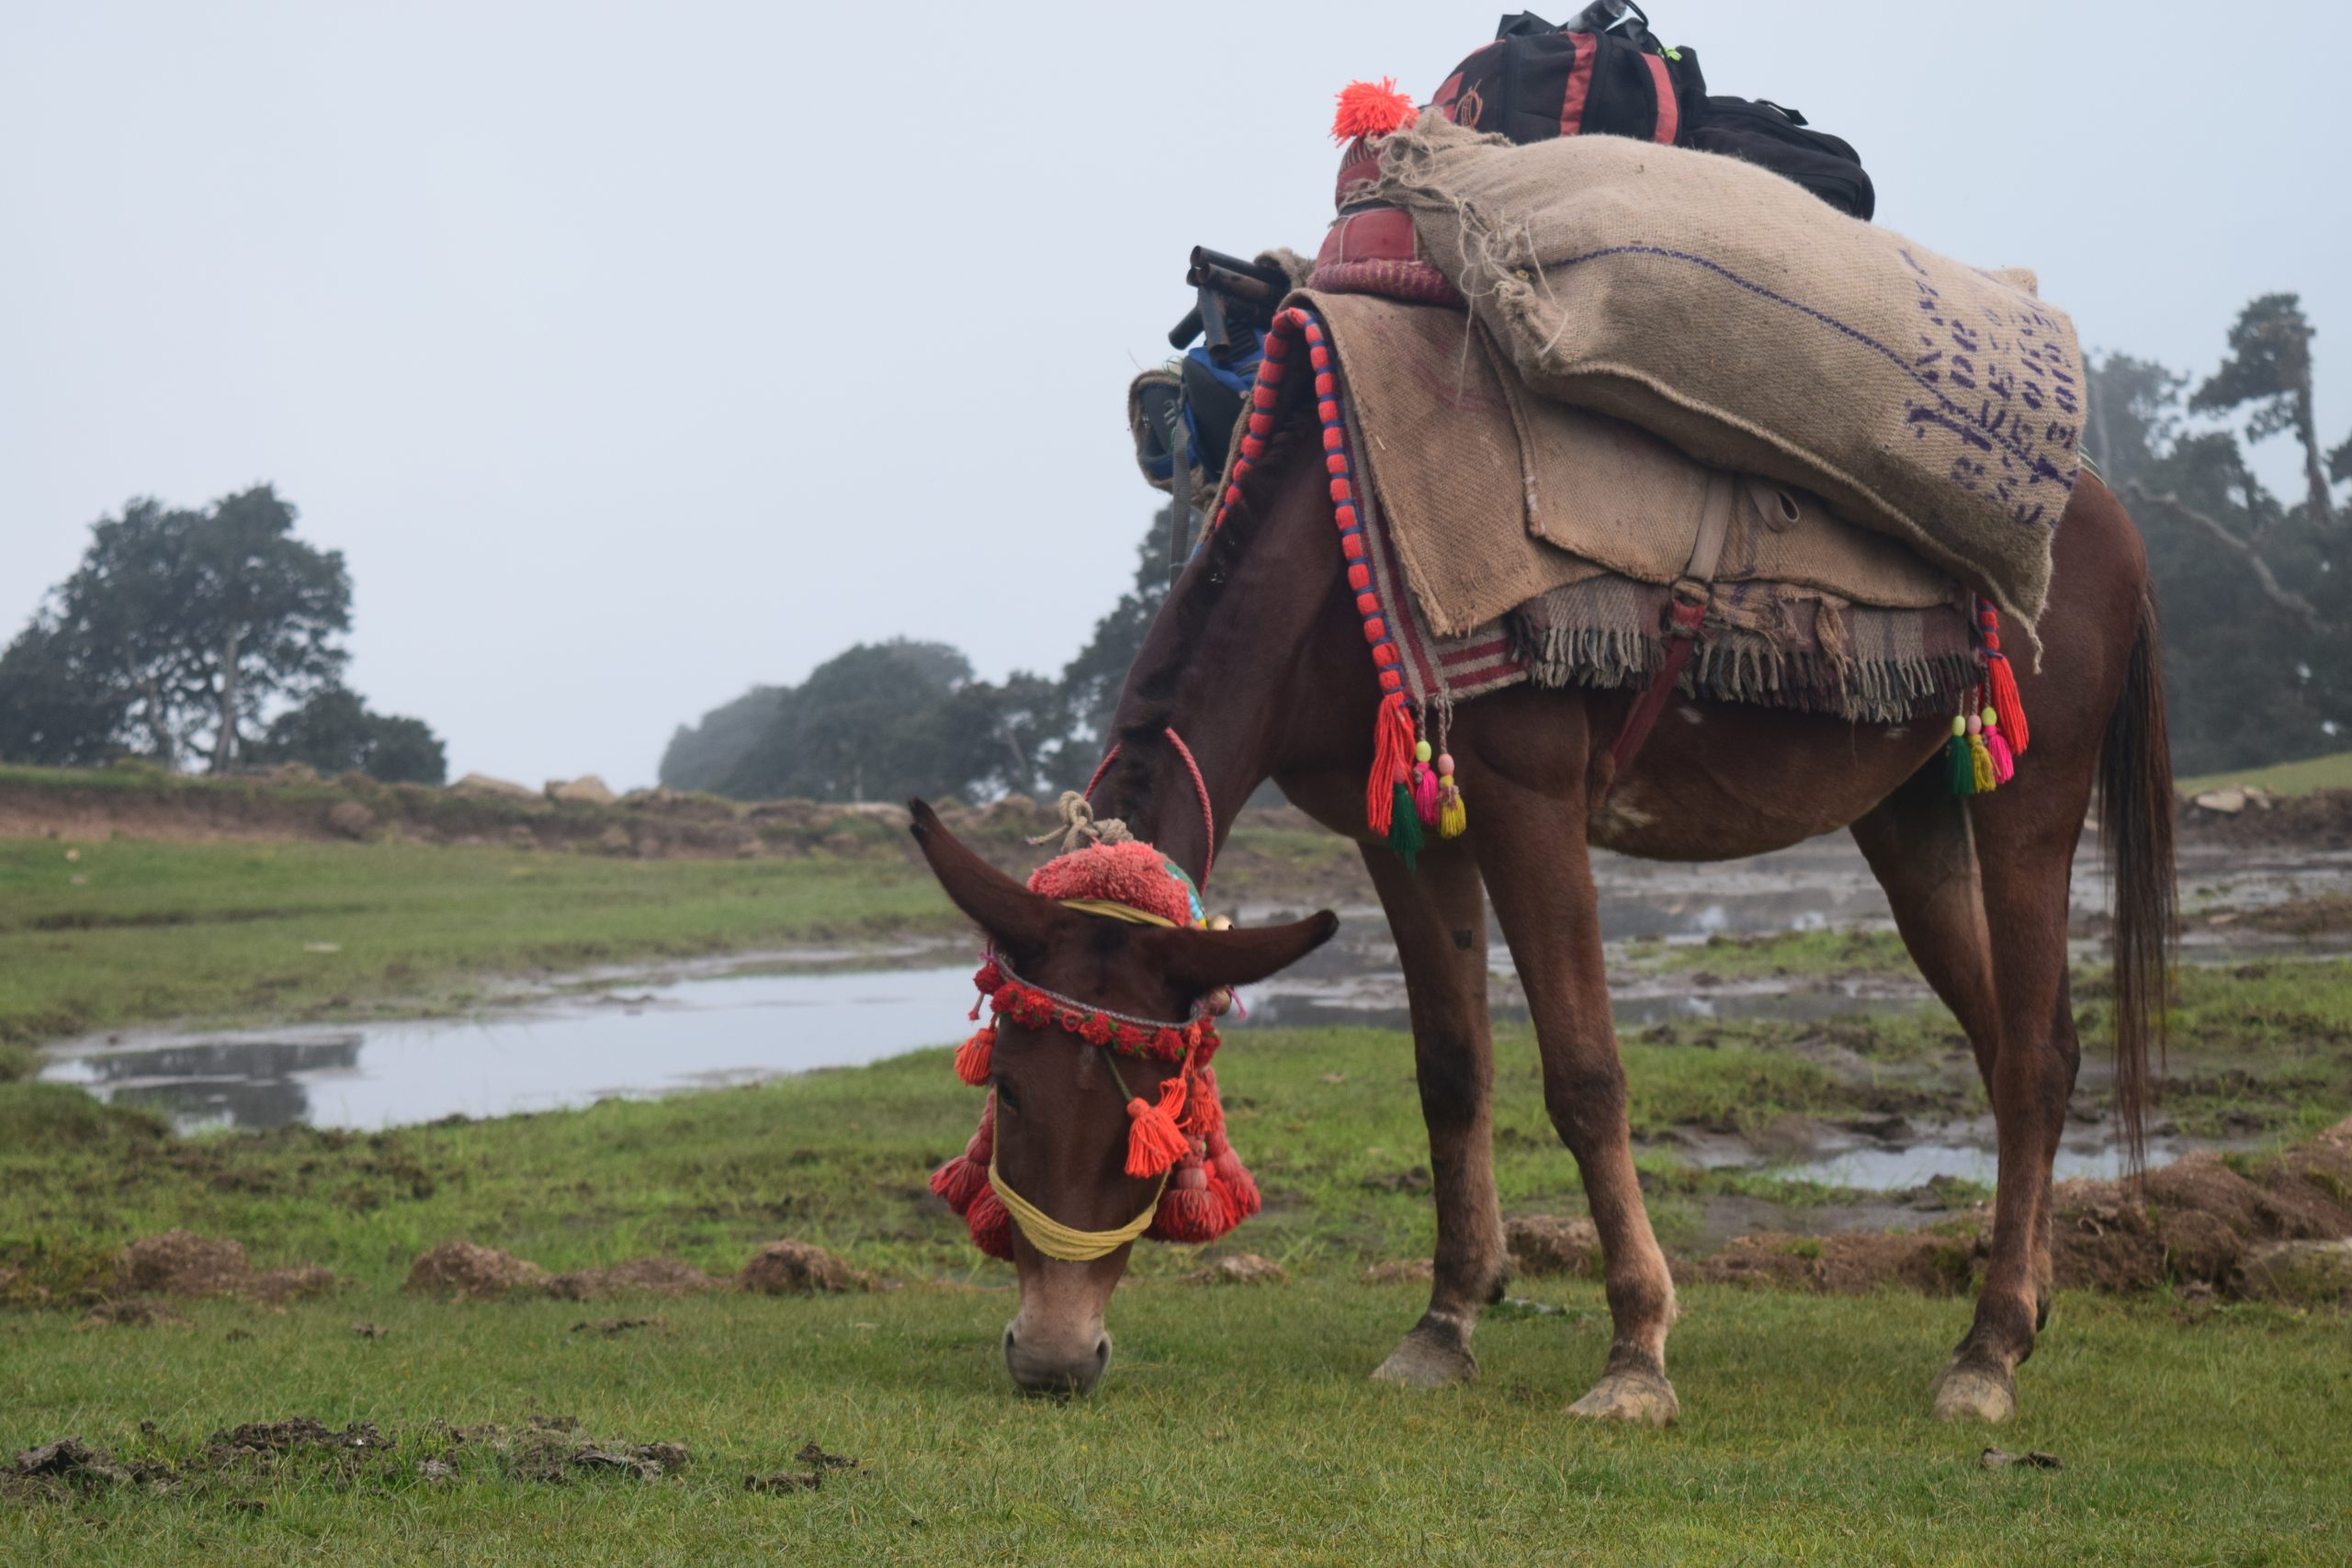 A Horse carrying load